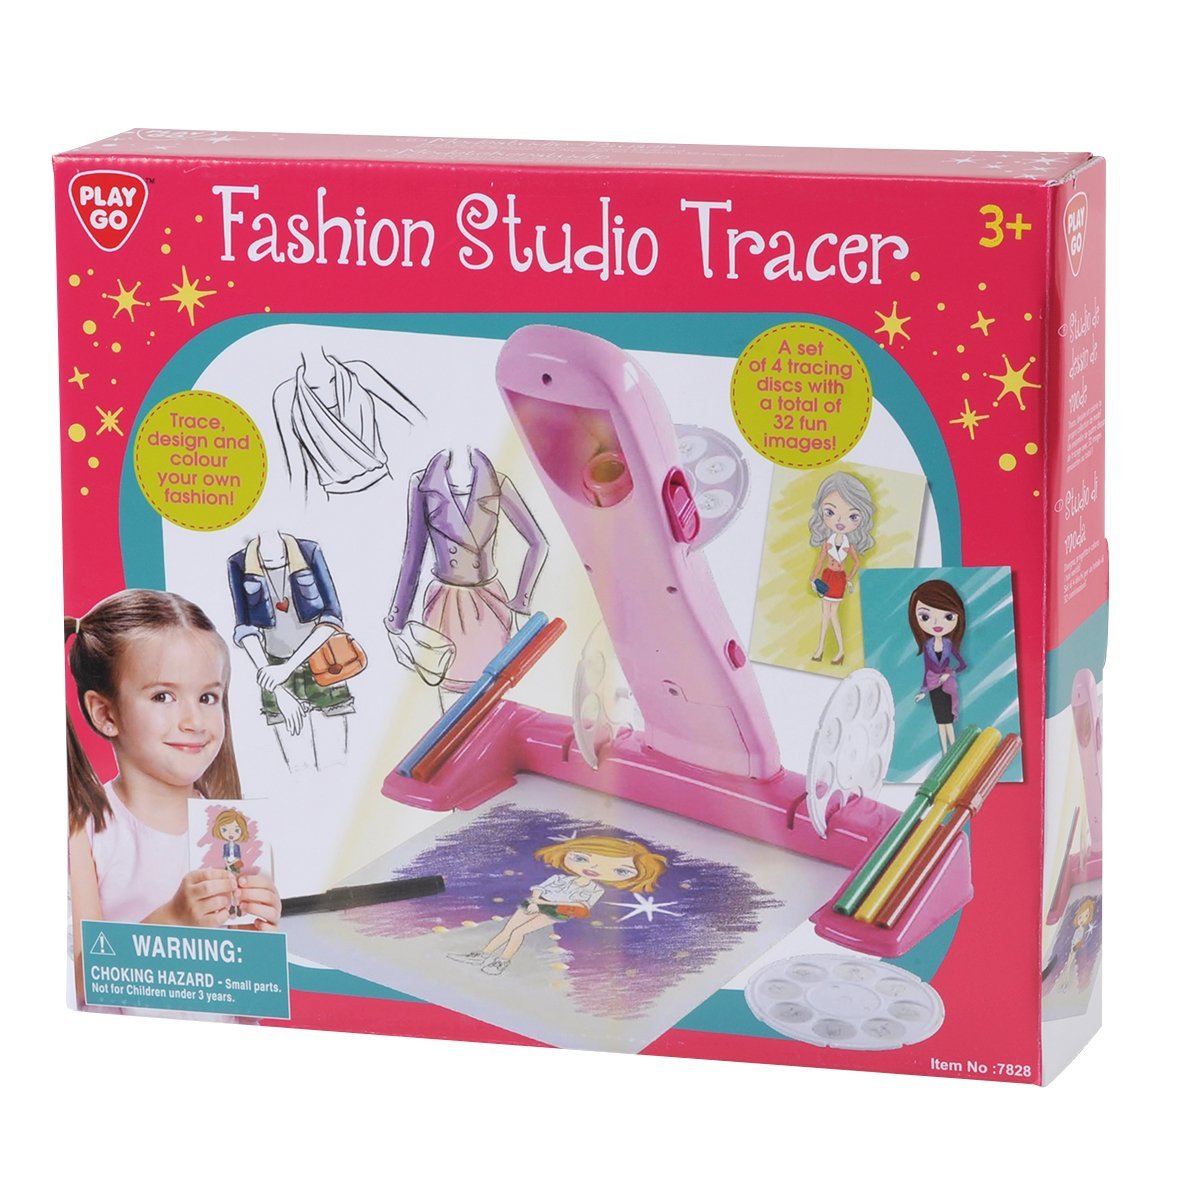 Picture of playgo 7828 Fashion Studio Tracer